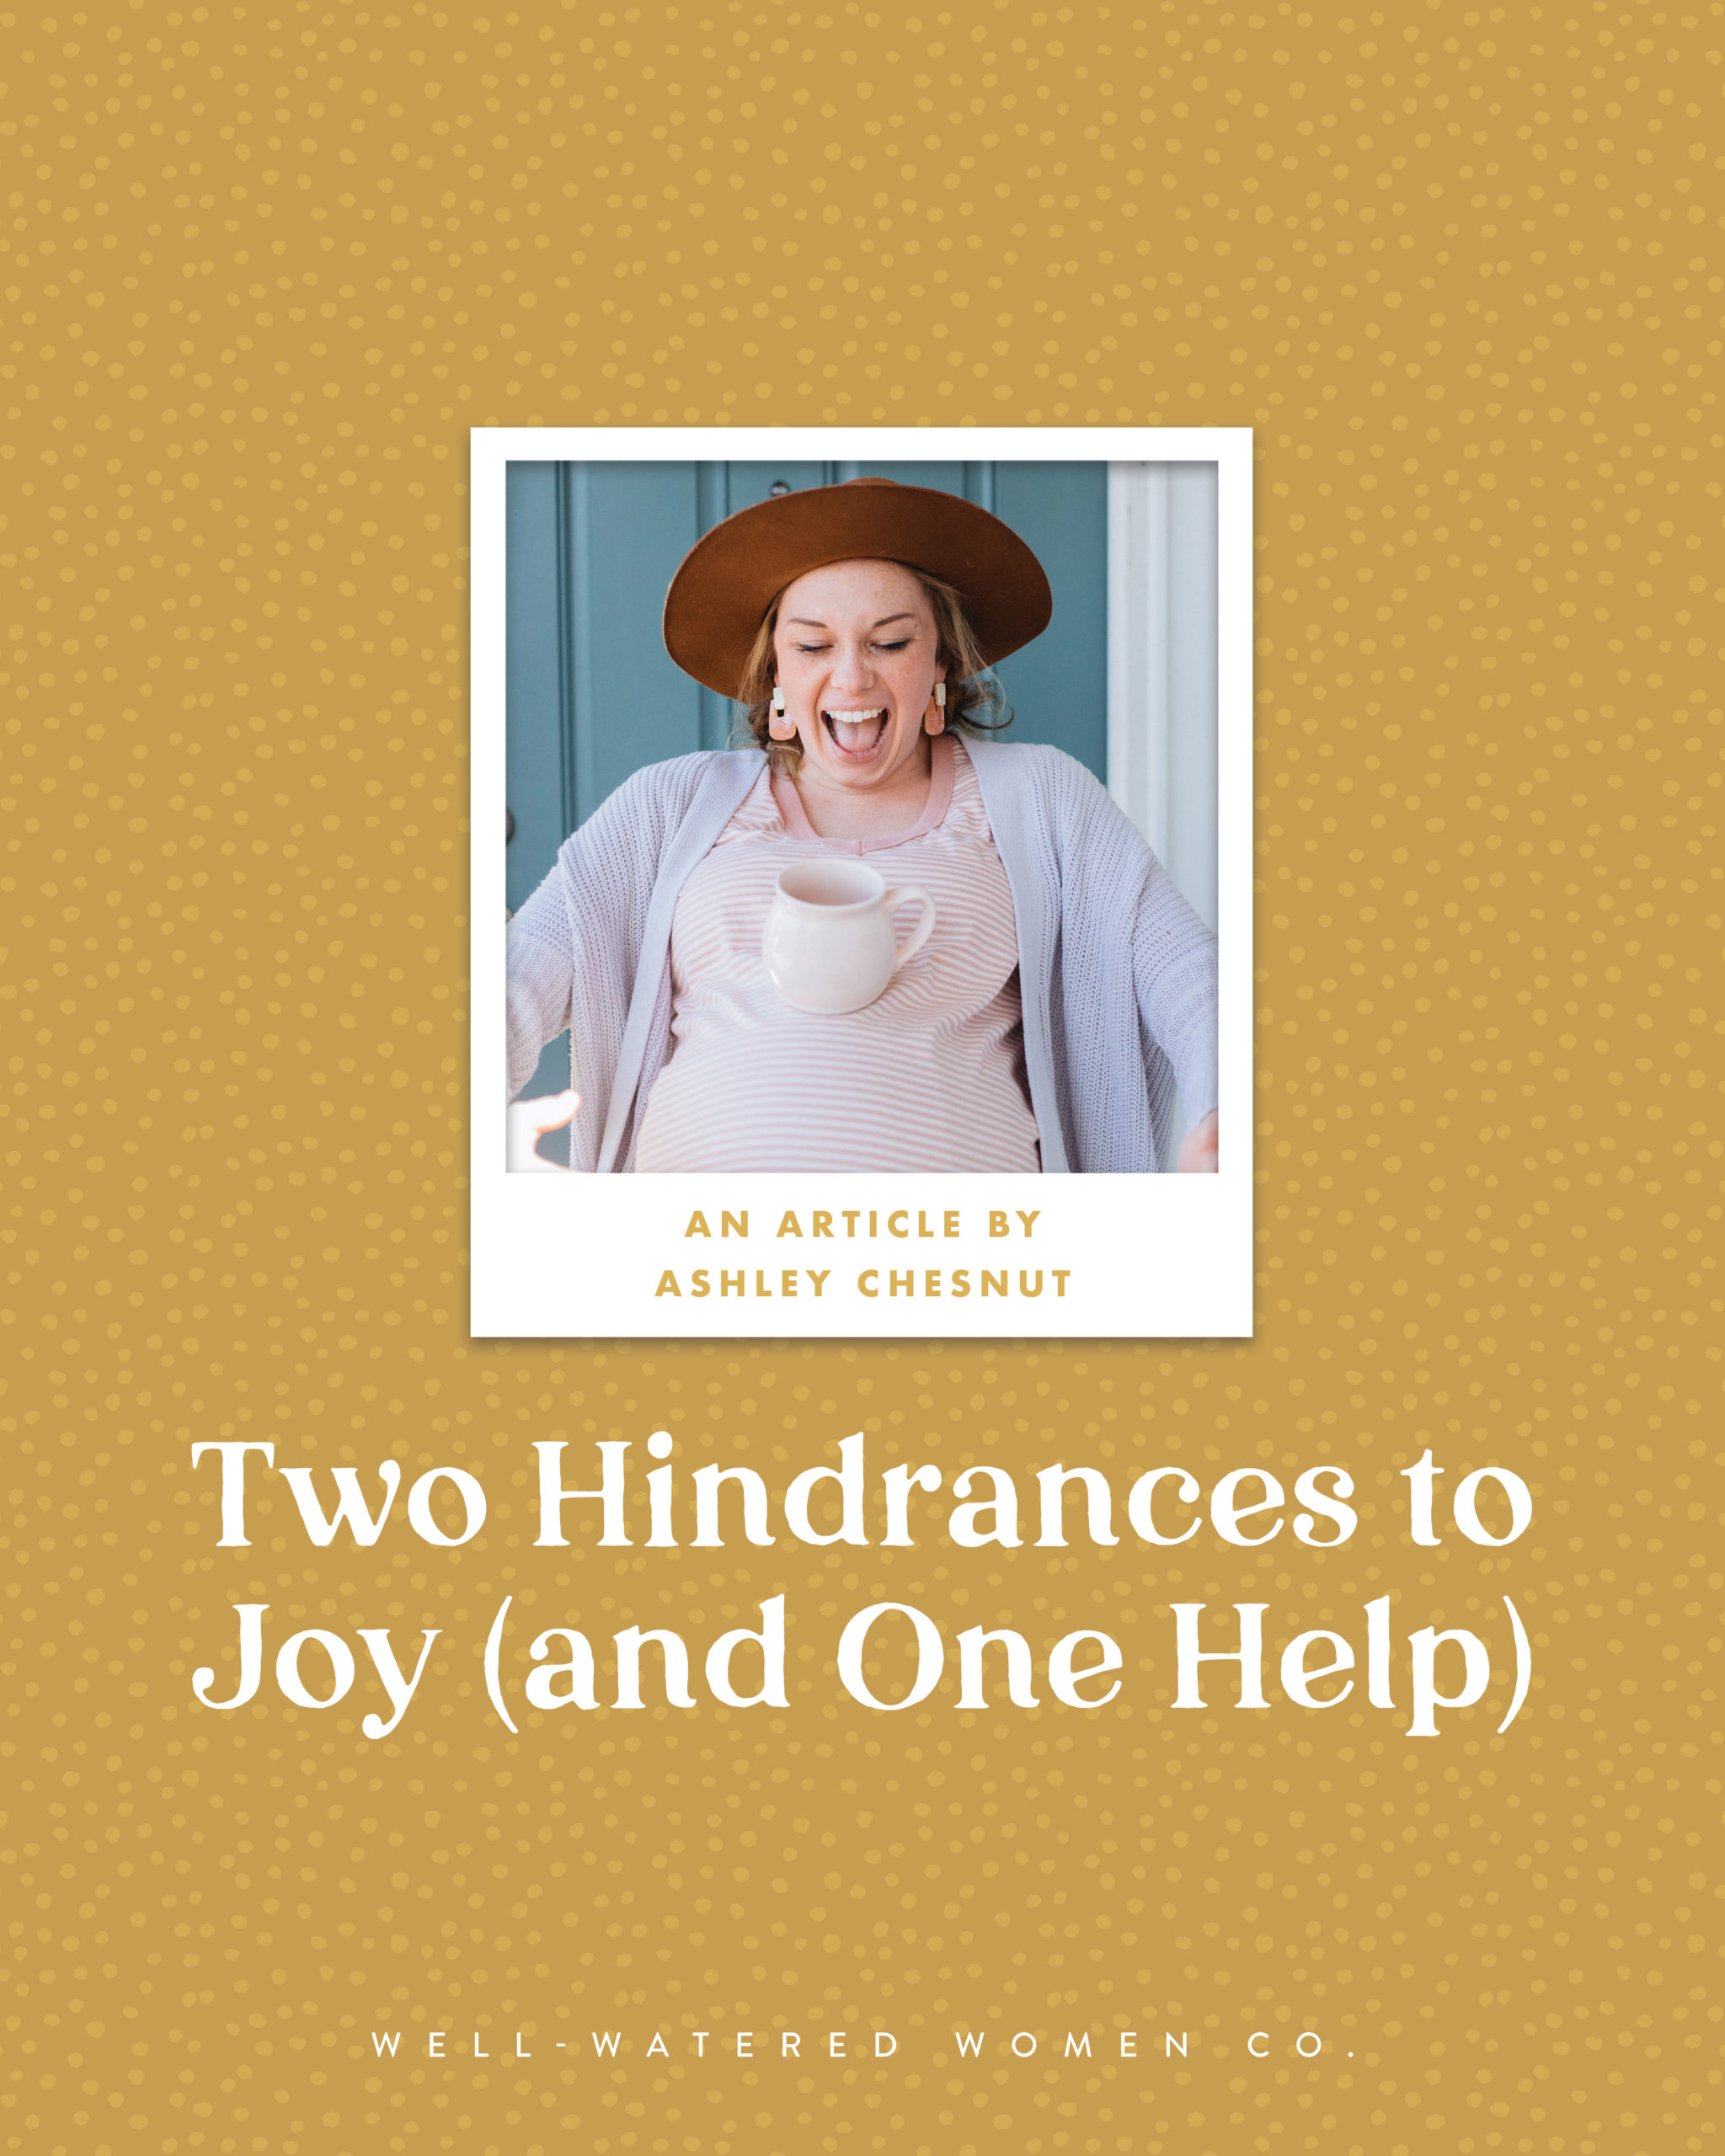 Two Hindrances to Joy (and One Help) - An Article by Ashley Chesnut